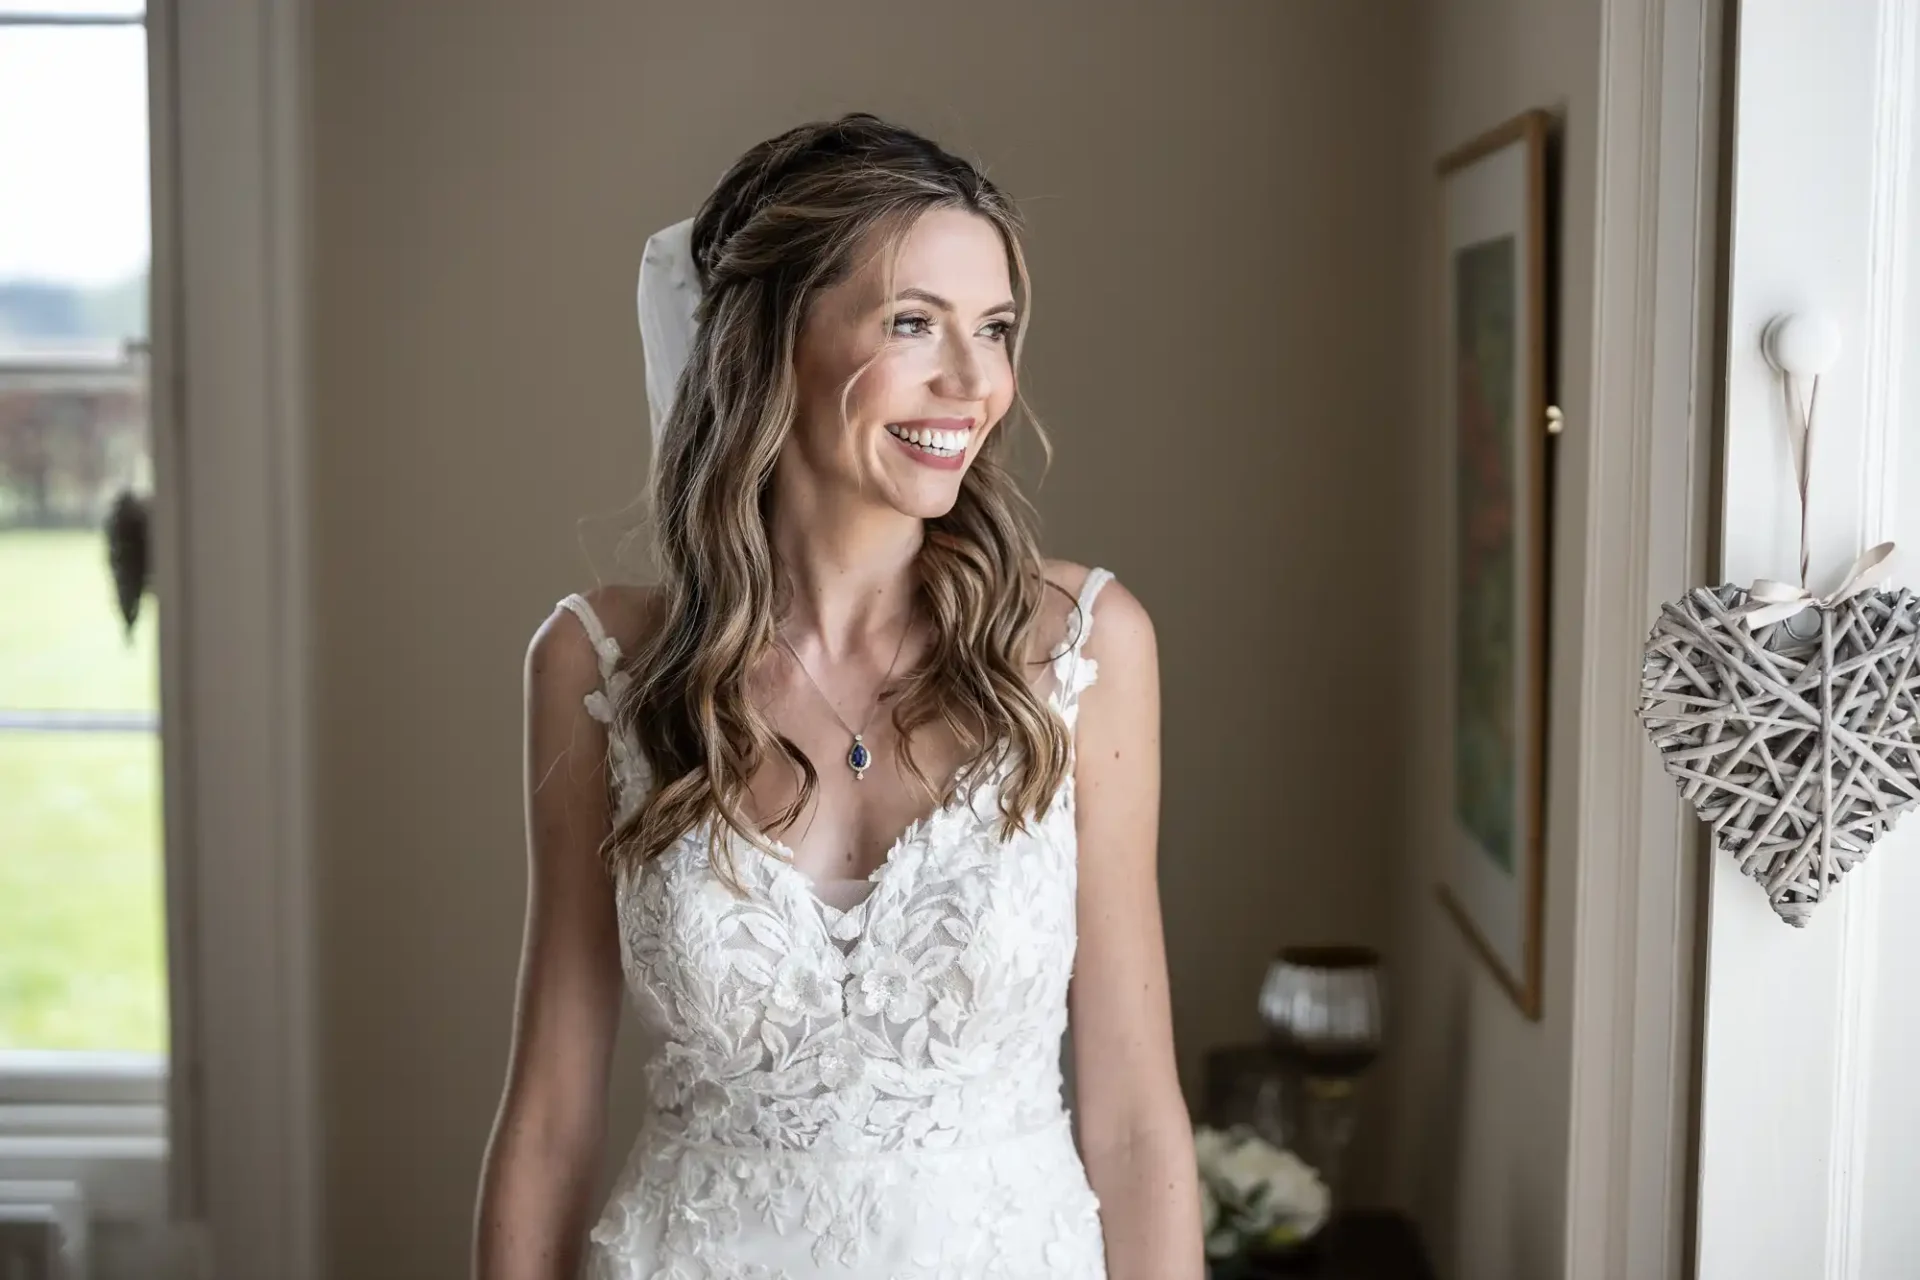 A bride with long wavy hair smiles while standing in a room decorated with a heart-shaped ornament and white flowers. She is wearing a sleeveless white lace wedding dress.